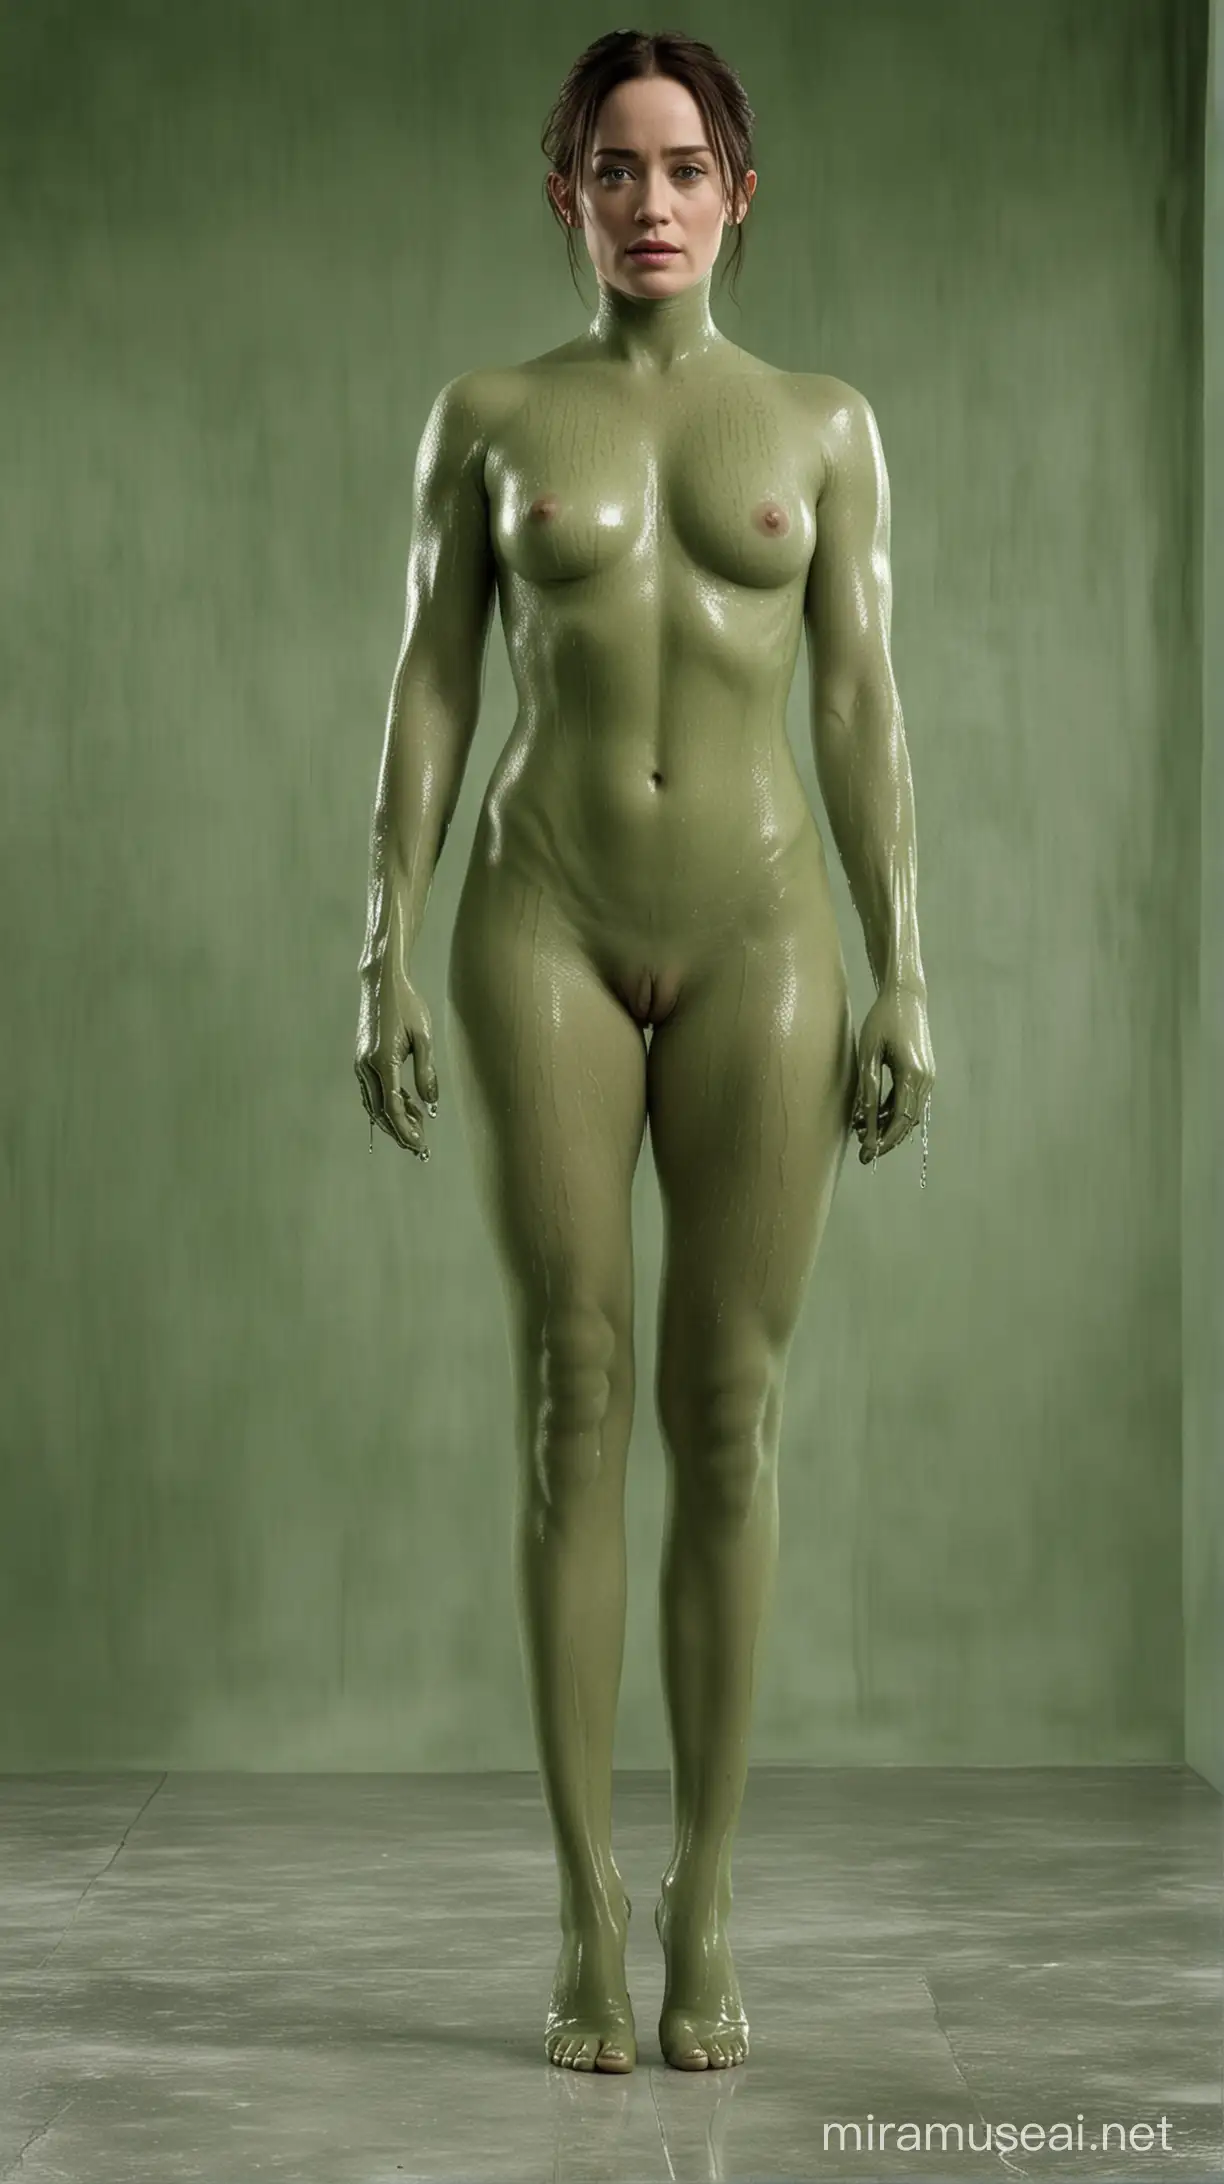 real photo, Emily Blunt , full frontal nudity, full figure in front full length view, The Matrix setting, greenish hue